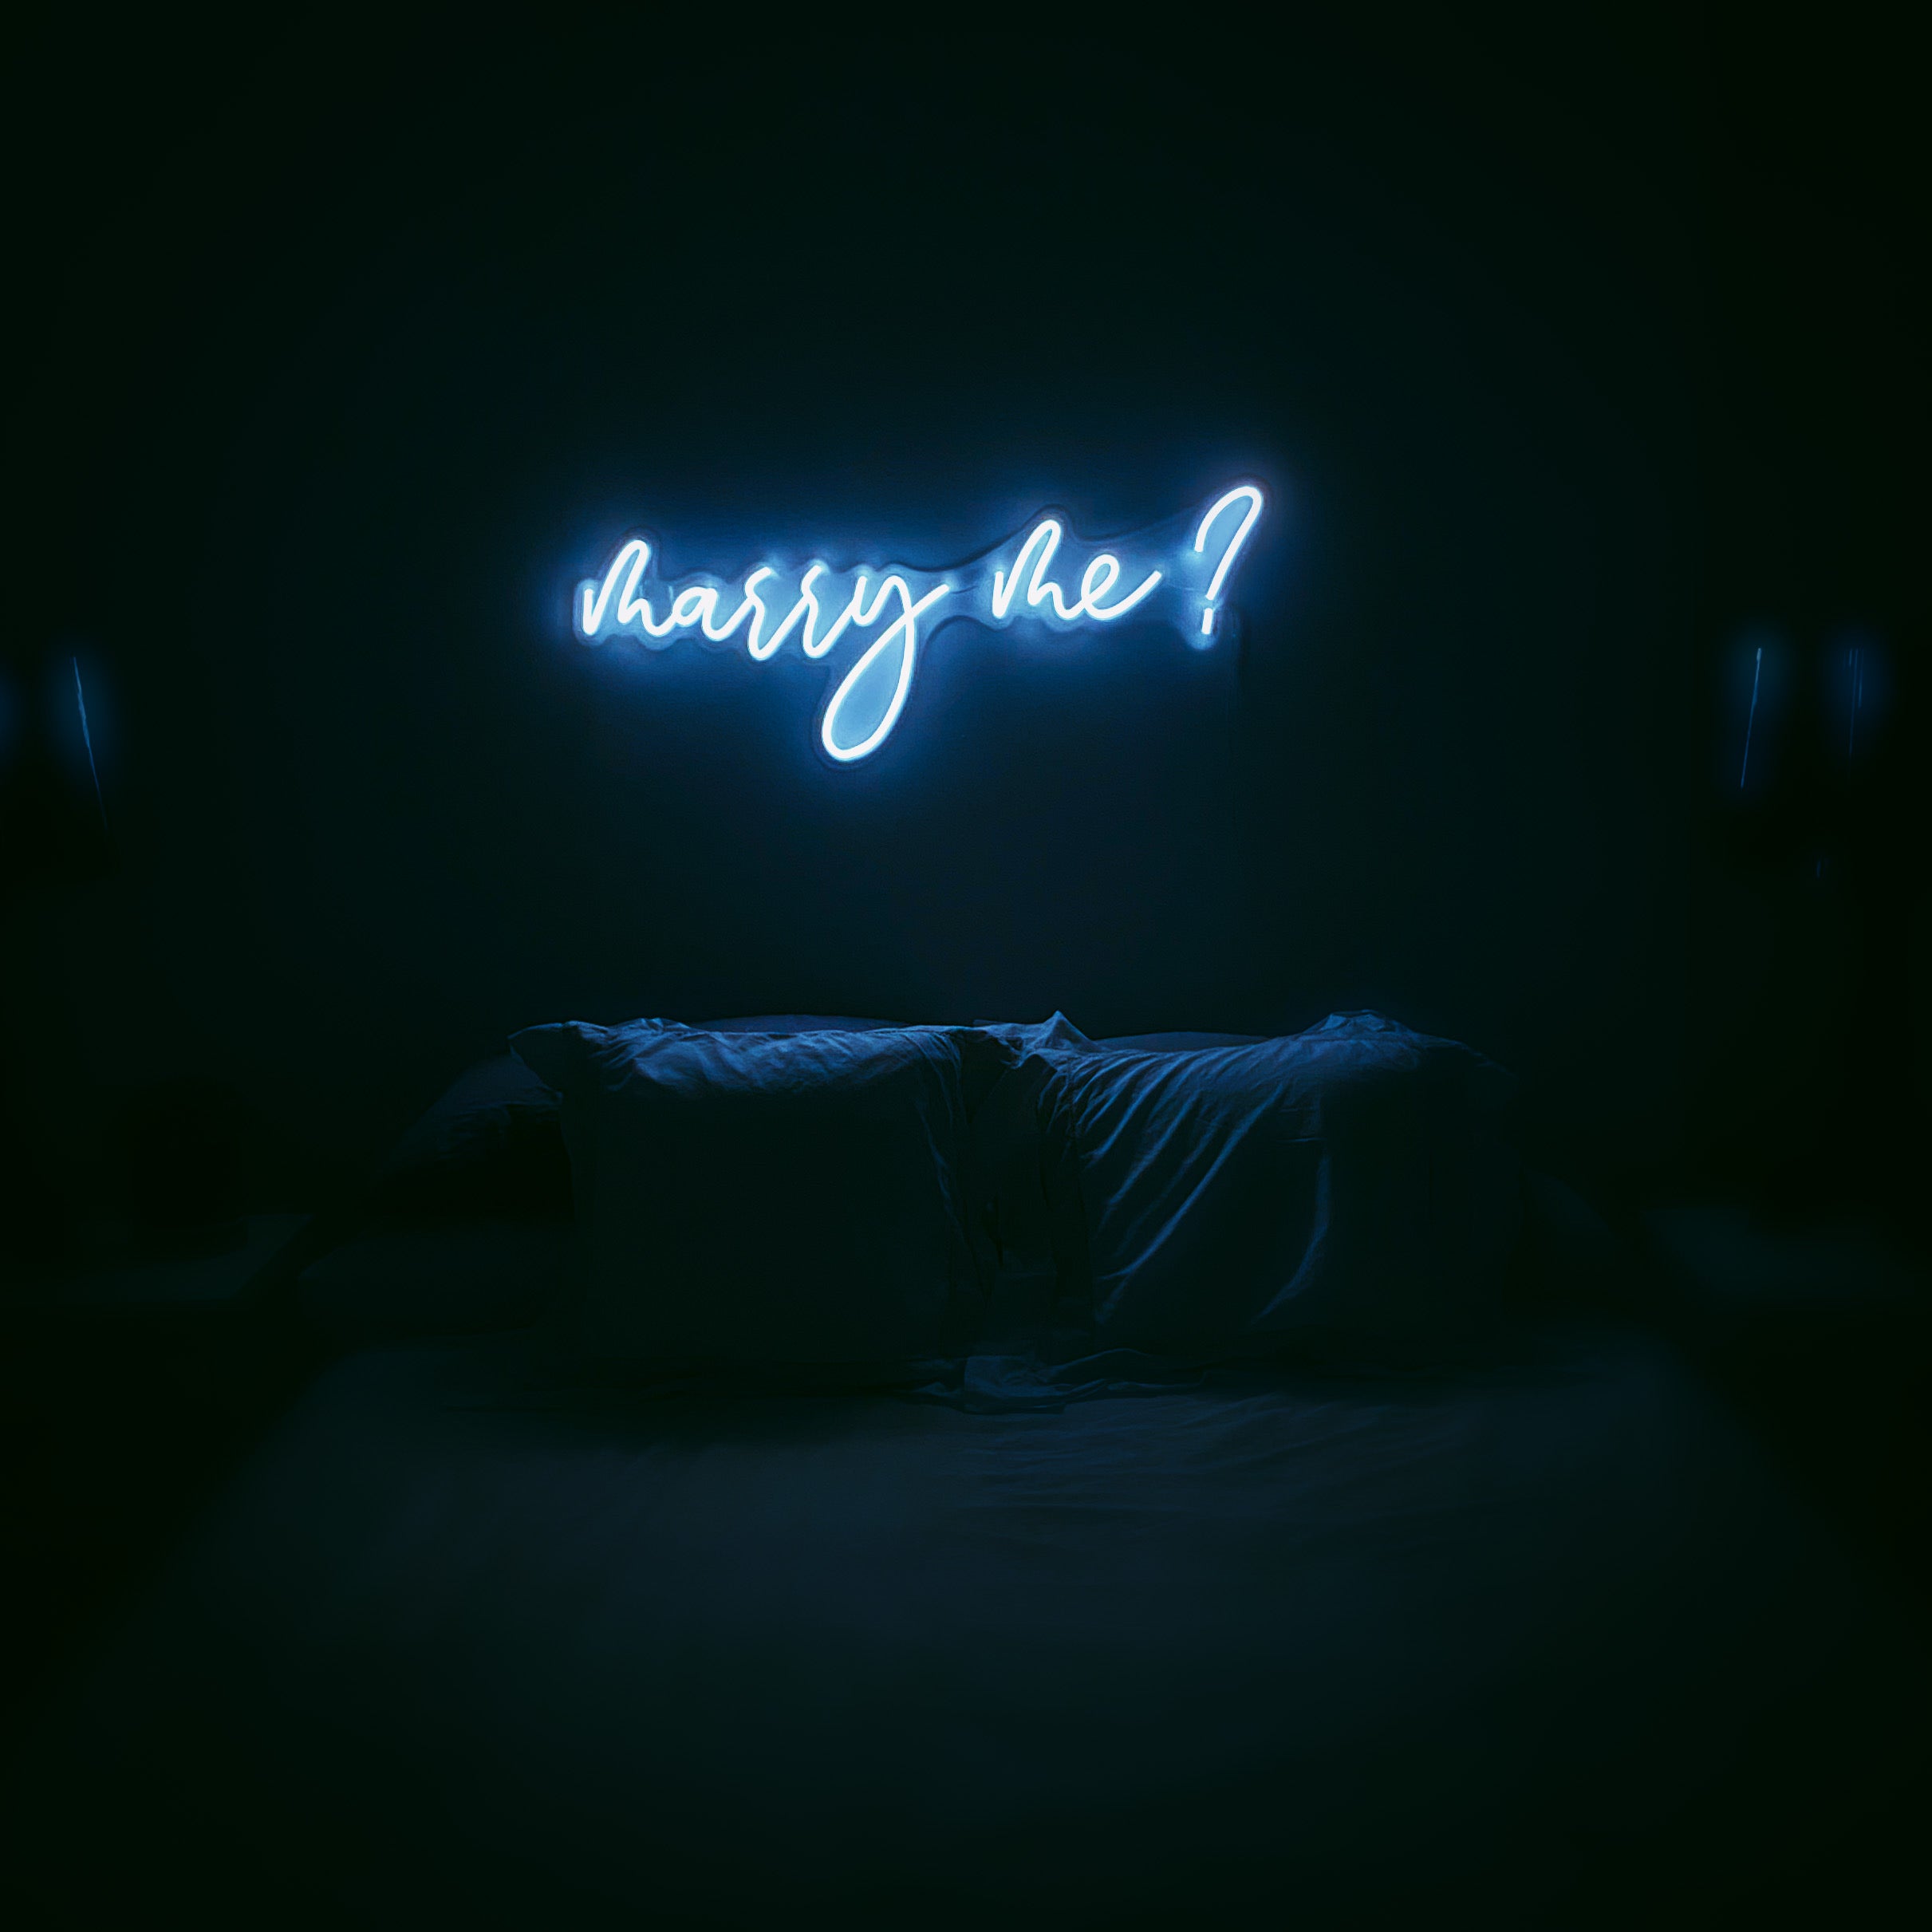 Marry Me? - Custom LED Neon-Style Wedding or Proposal Sign